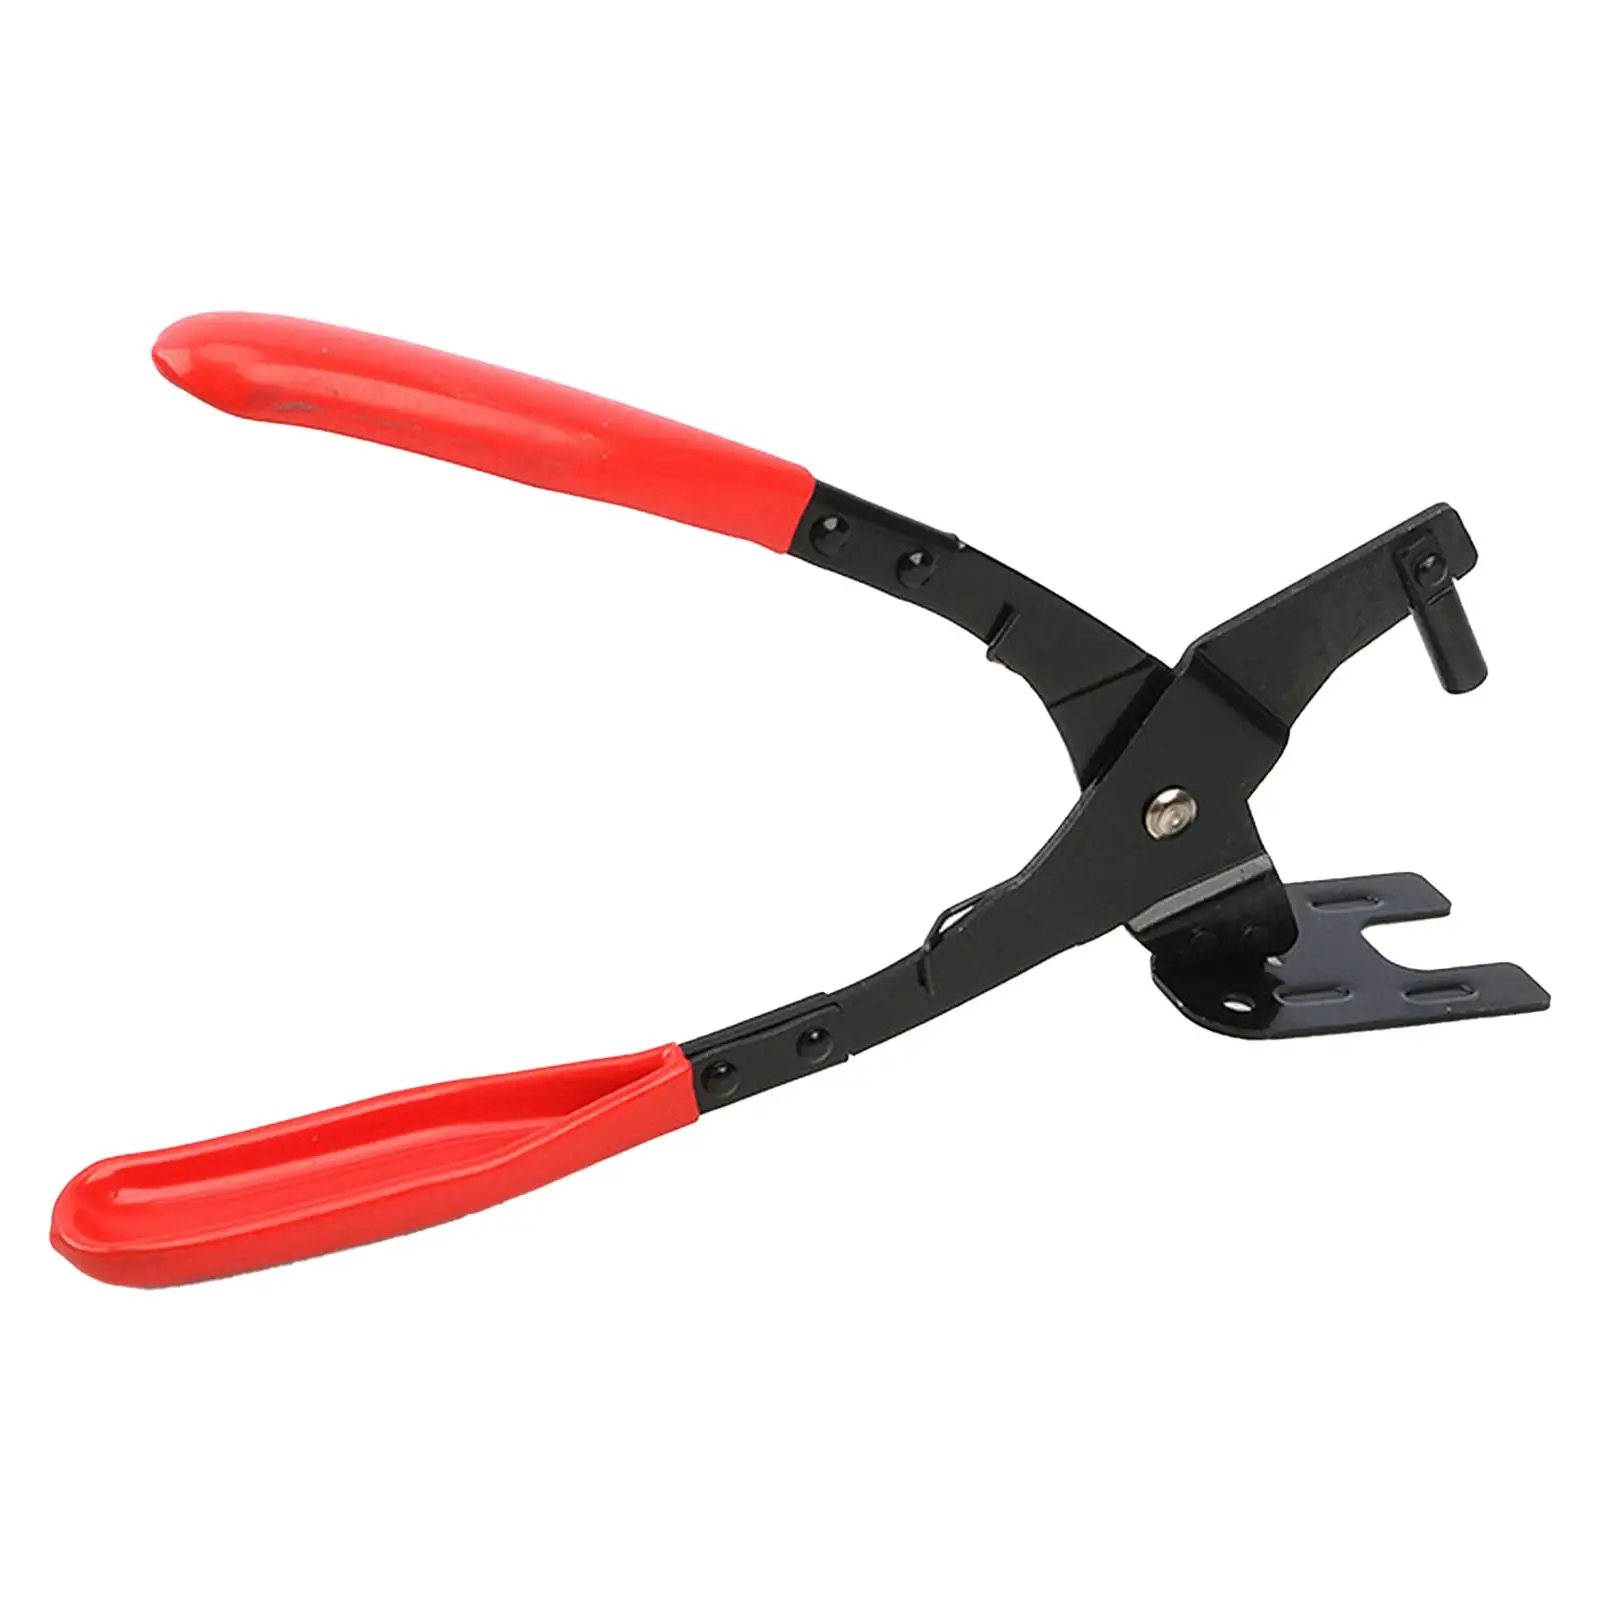 Exhaust Hanger Removal Pliers Non Slip Hand Operated Tools Heavy Duty Exhaust Hanger Removal Tool Red for Tailpipes, Mufflers